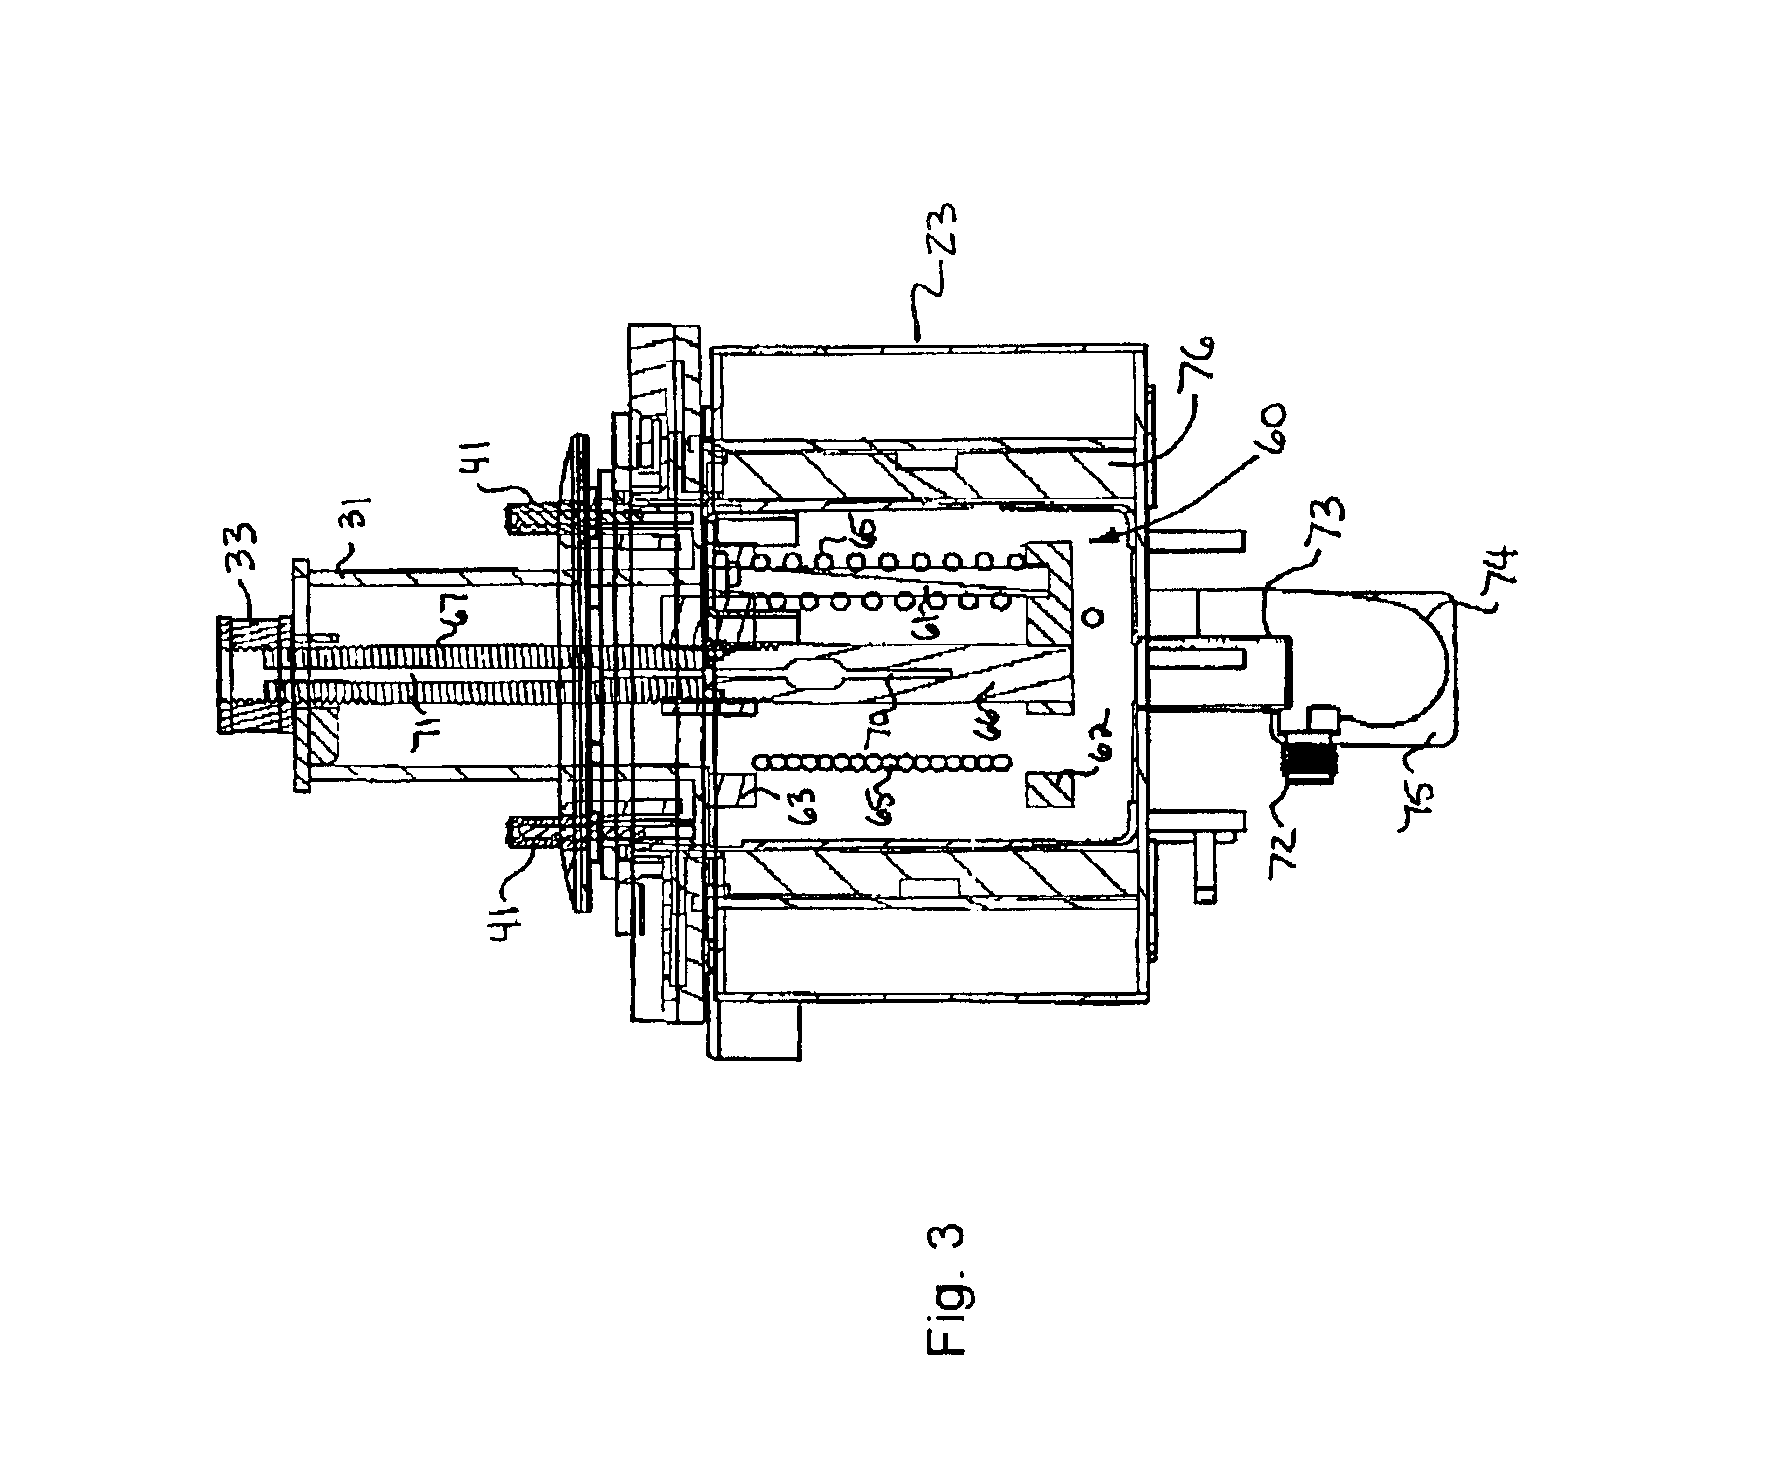 Method and apparatus for continuous flow microwave-assisted chemistry techniques